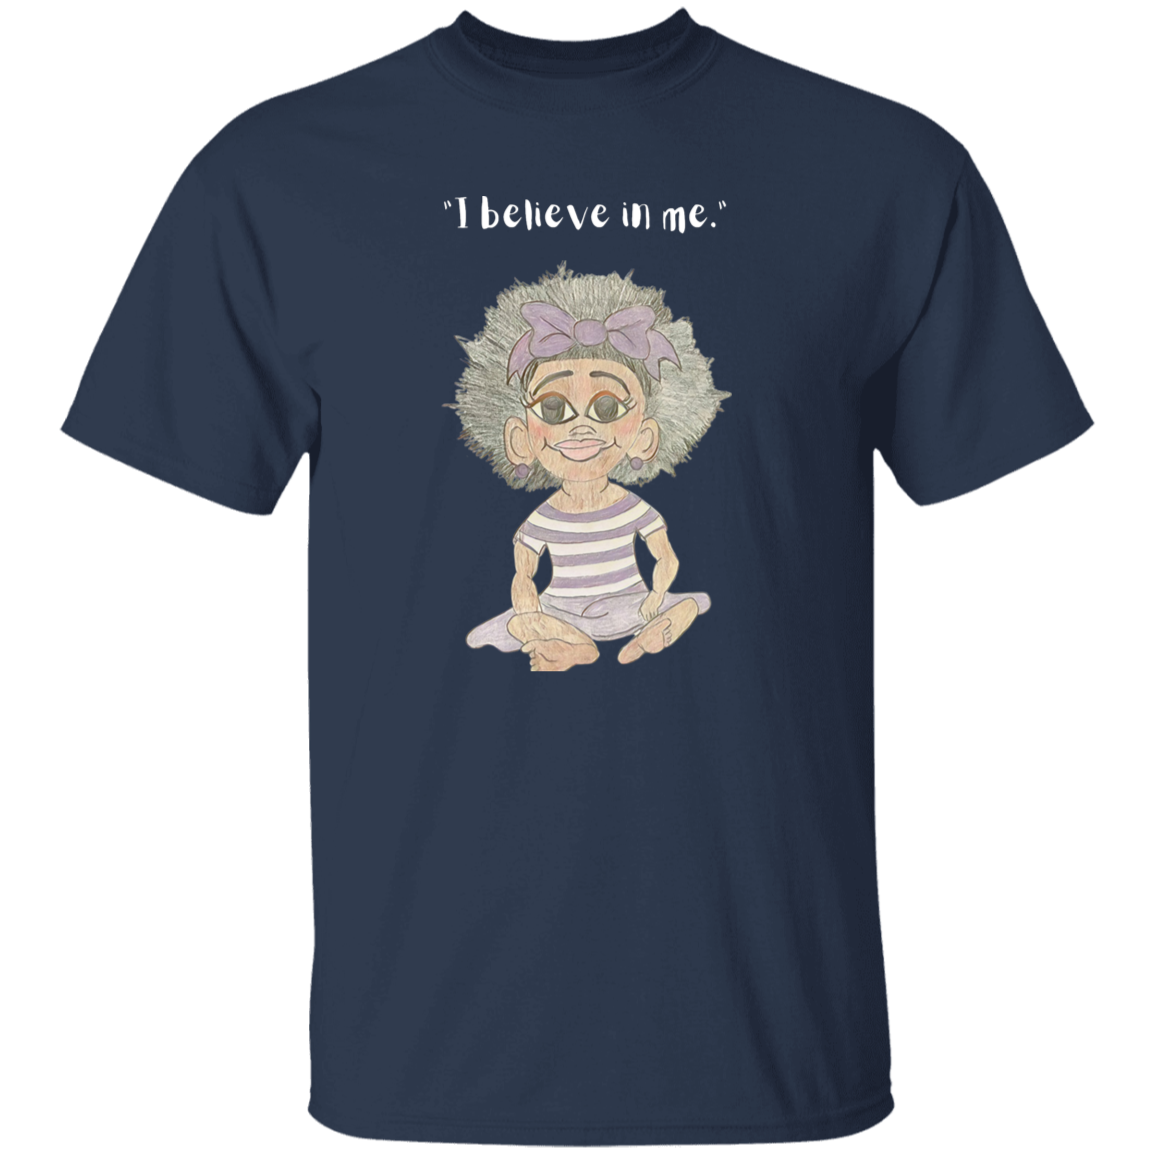 I believe in me Youth 5.3 oz 100% Cotton T-Shirt